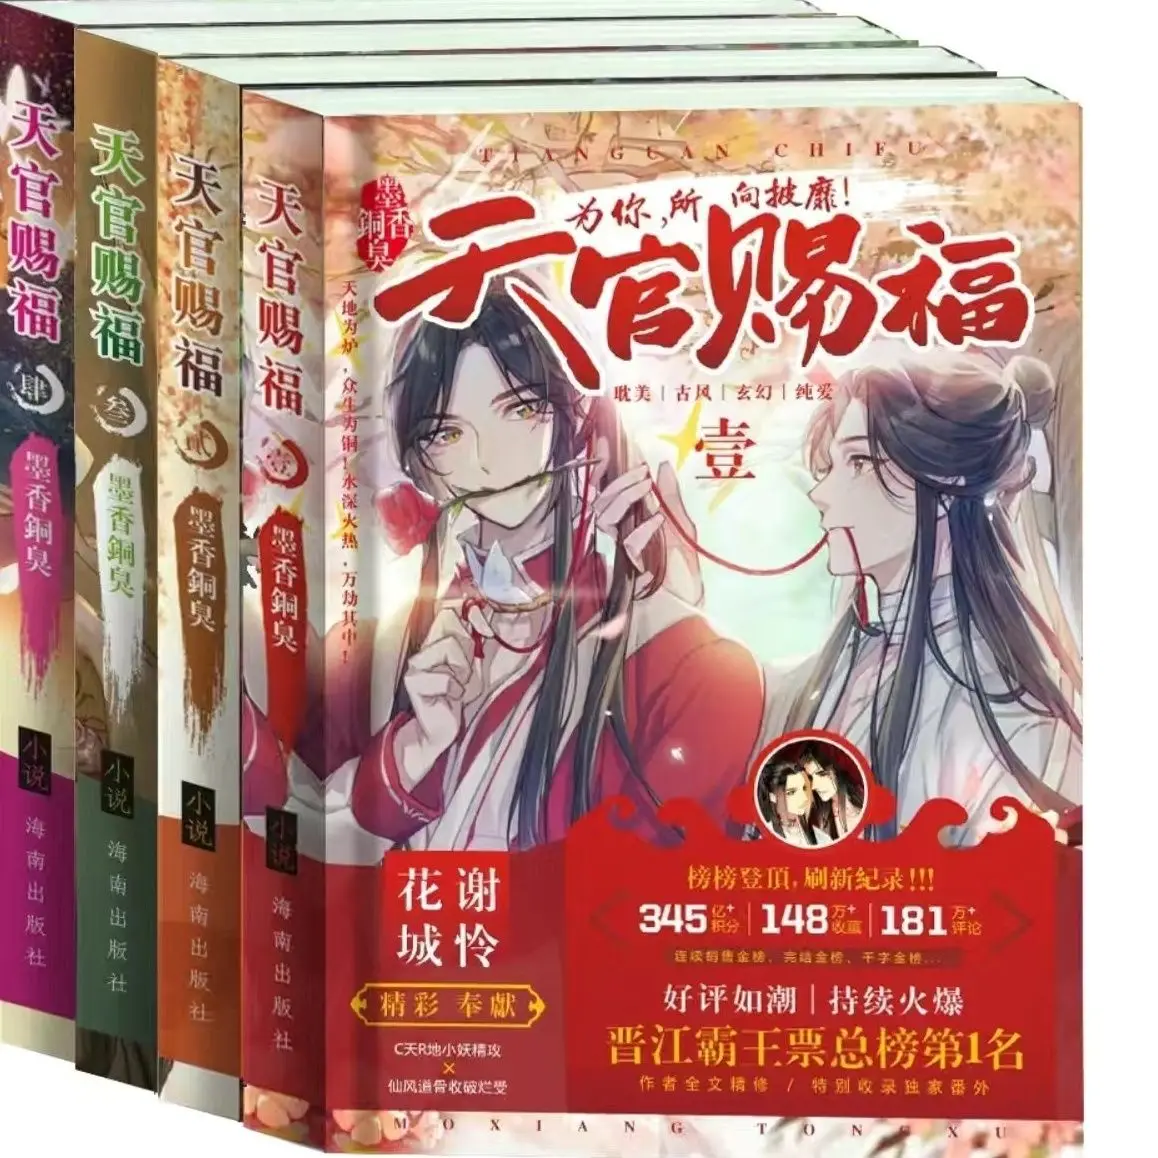 Heaven Official's Blessing Entity Book Tian Guan Ci Fu By MXTX Chinese Fantasy Novel Without Delection Ancient Romance Novels